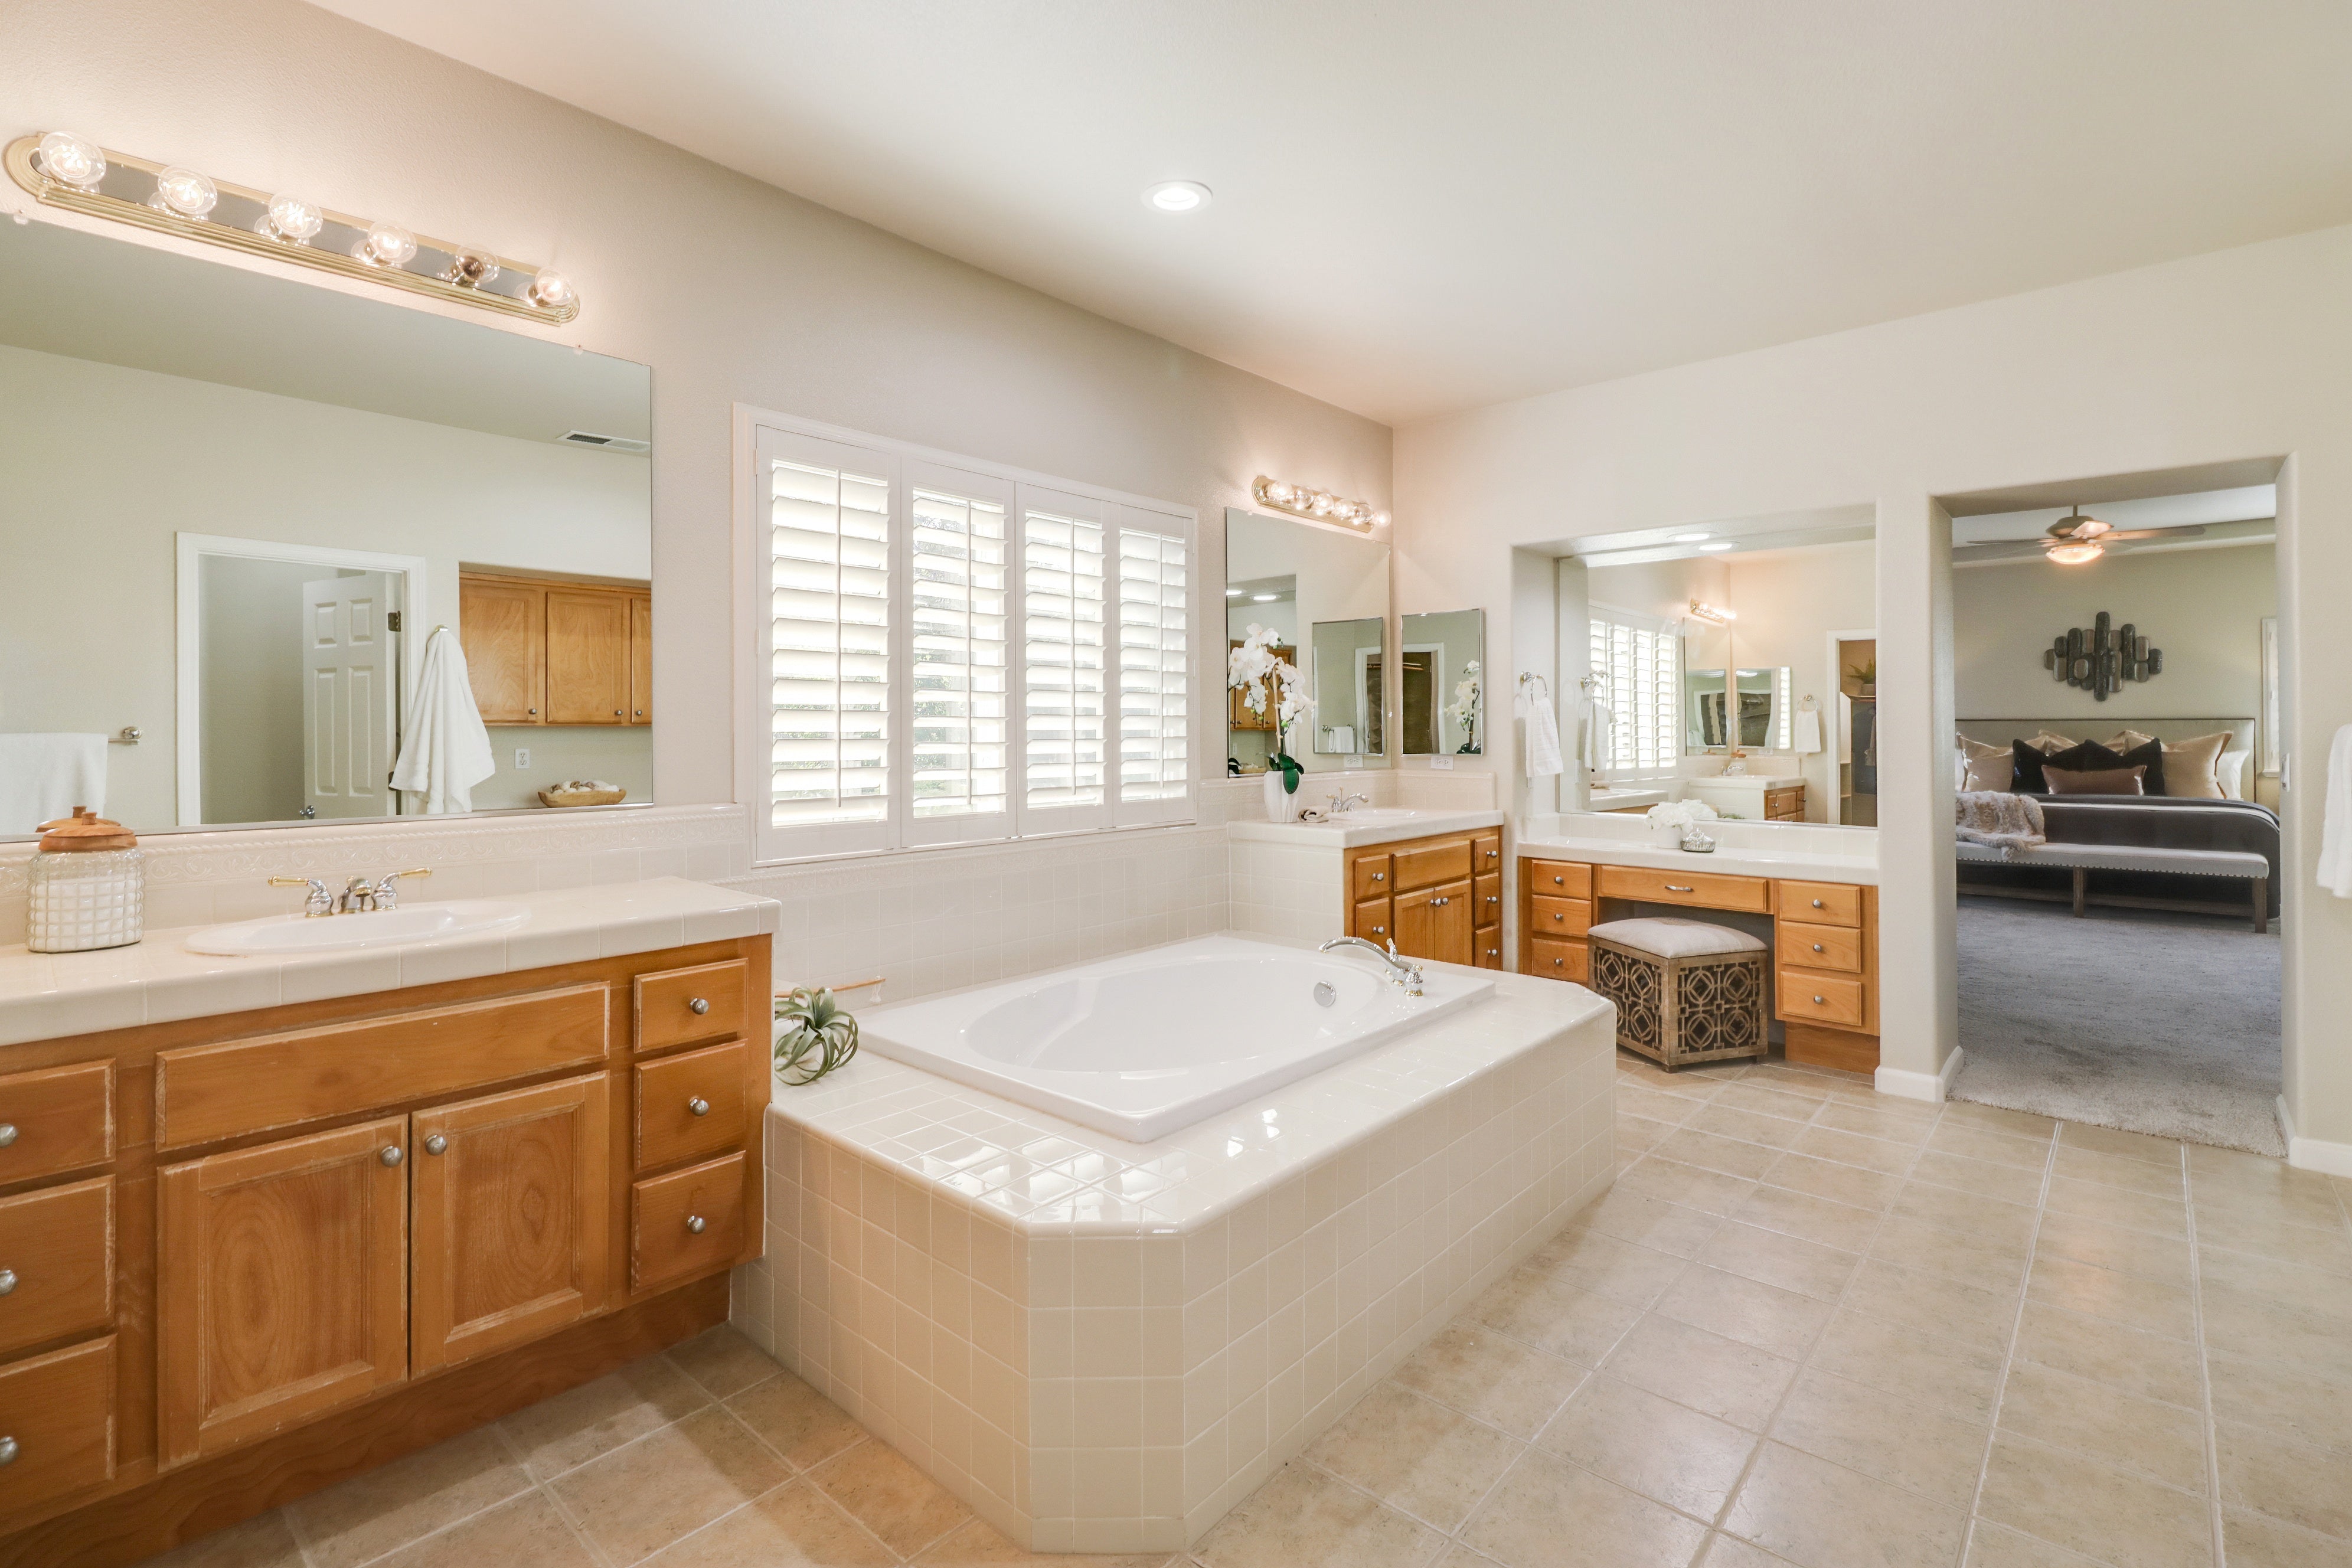 Premiere Home Staging Projects | Bathroom interior design idea - Ludlow, Roseville